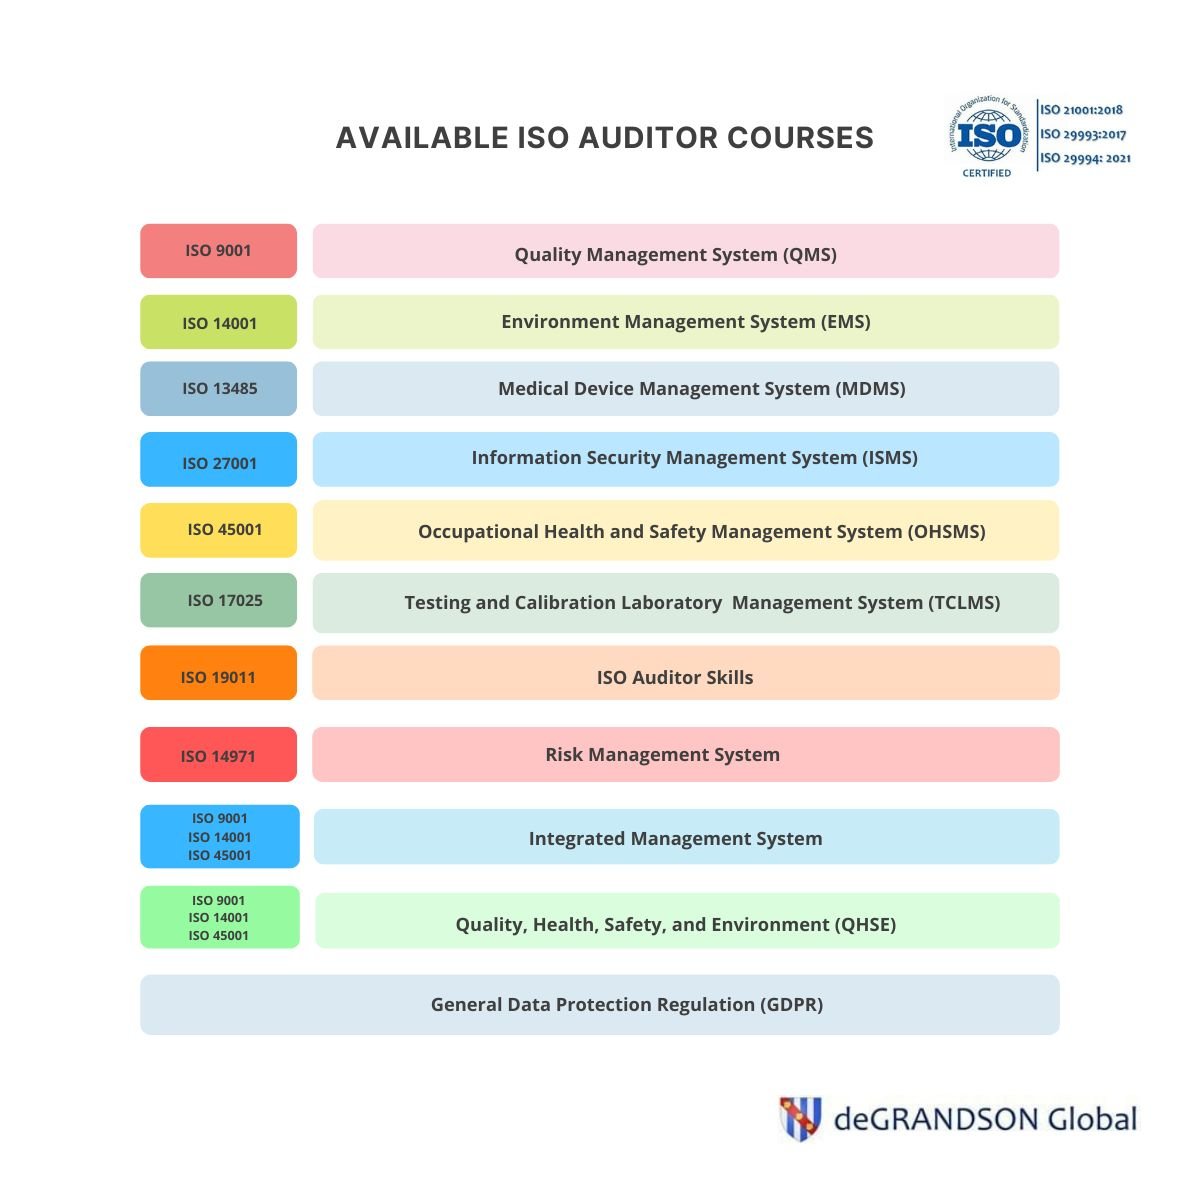 Graphic showing the ISOAuditor training and certification courses that deGRANDSON offers online